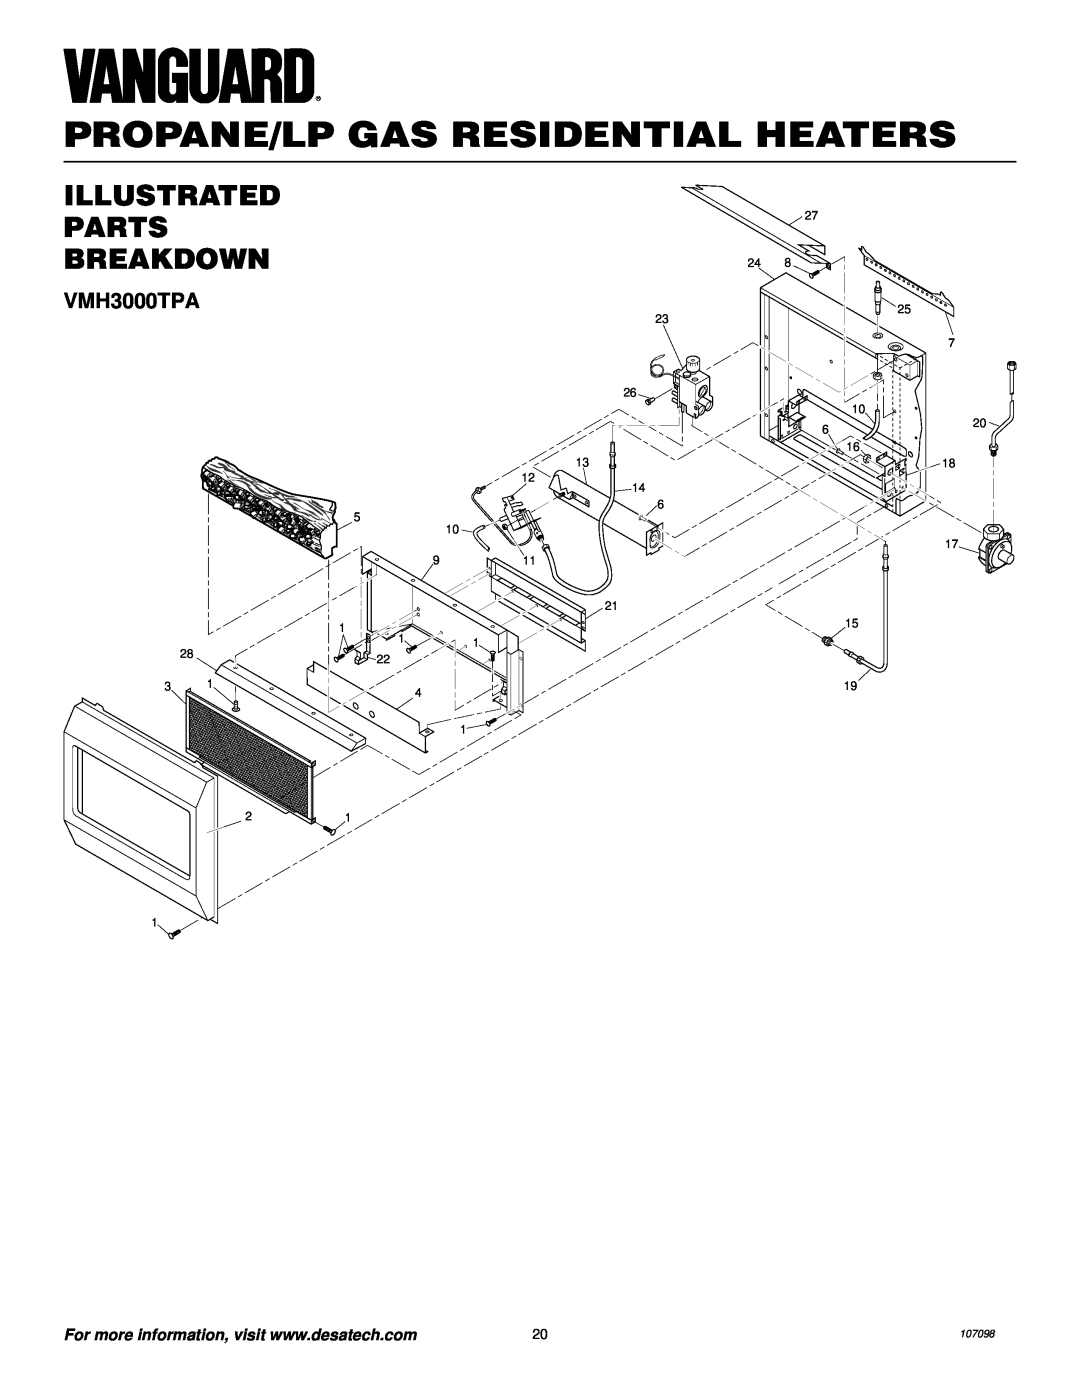 Vanguard Heating VMH3000TPA installation manual Illustrated Parts Breakdown, Propane/Lp Gas Residential Heaters 